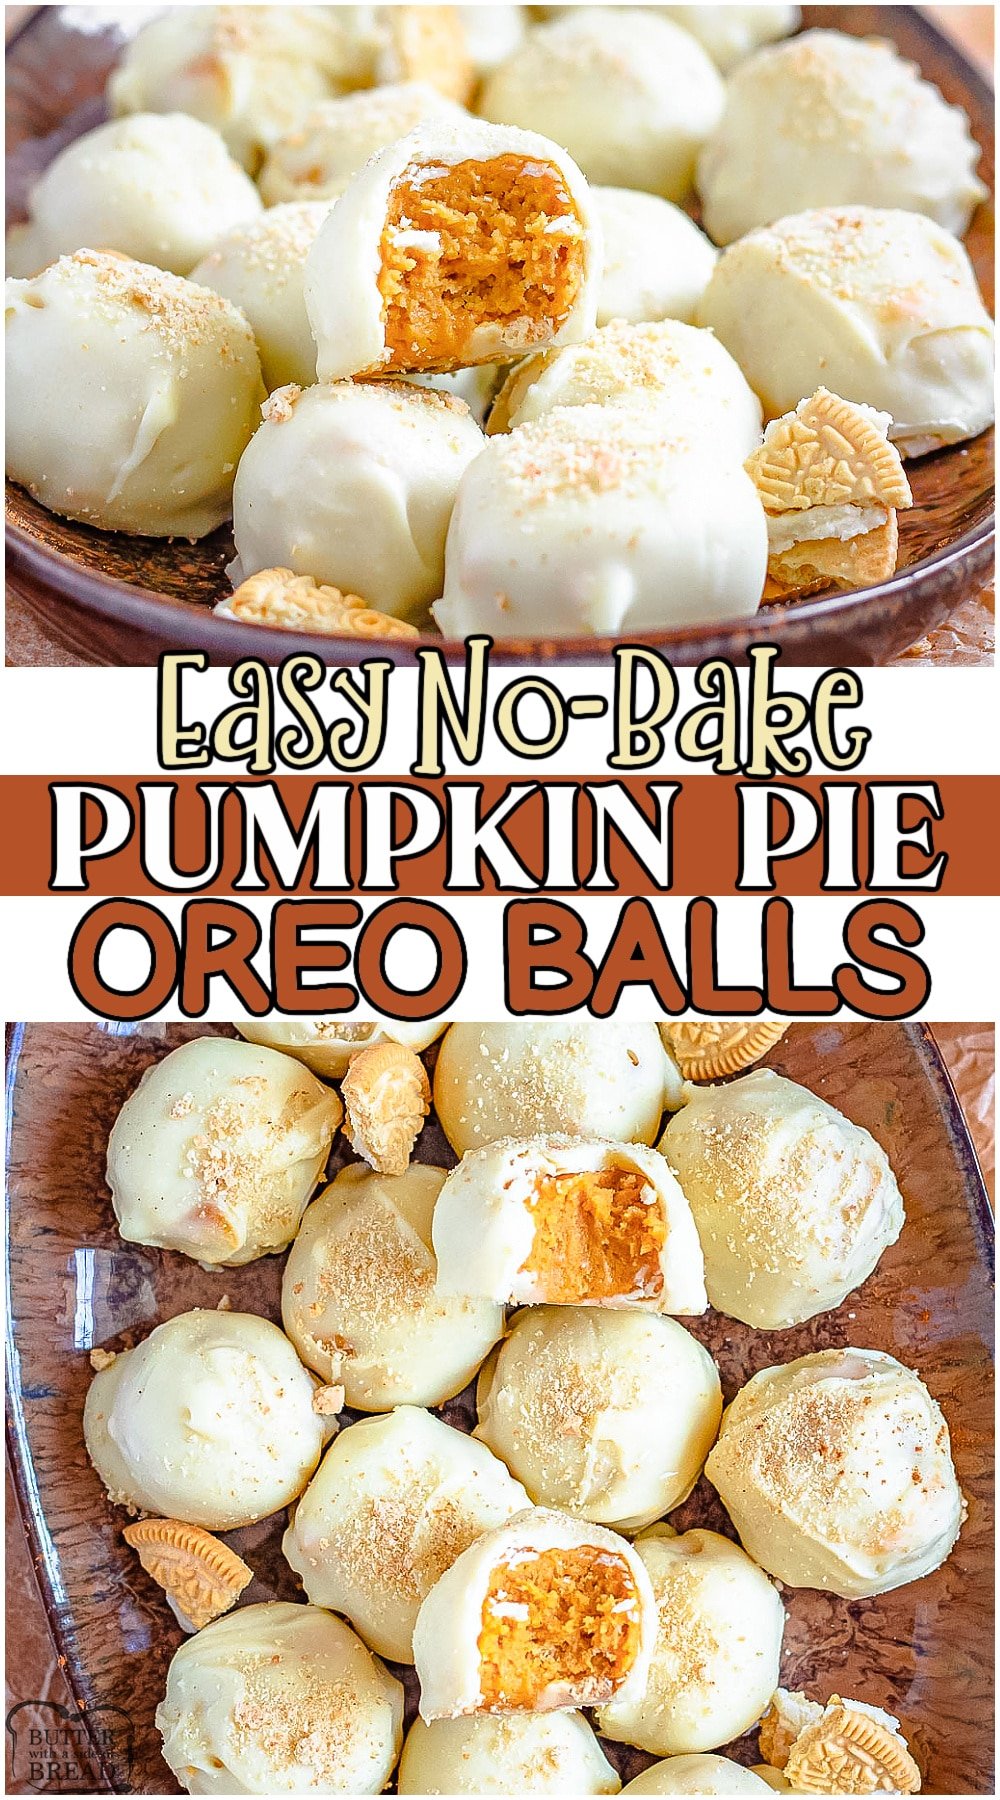 Pumpkin Pie OREO Balls made easy with Golden Oreos, pumpkin, cream cheese and warm Fall spices. Dipped in white chocolate, these pumpkin oreo balls are a fantastic no-bake treat perfect for parties!